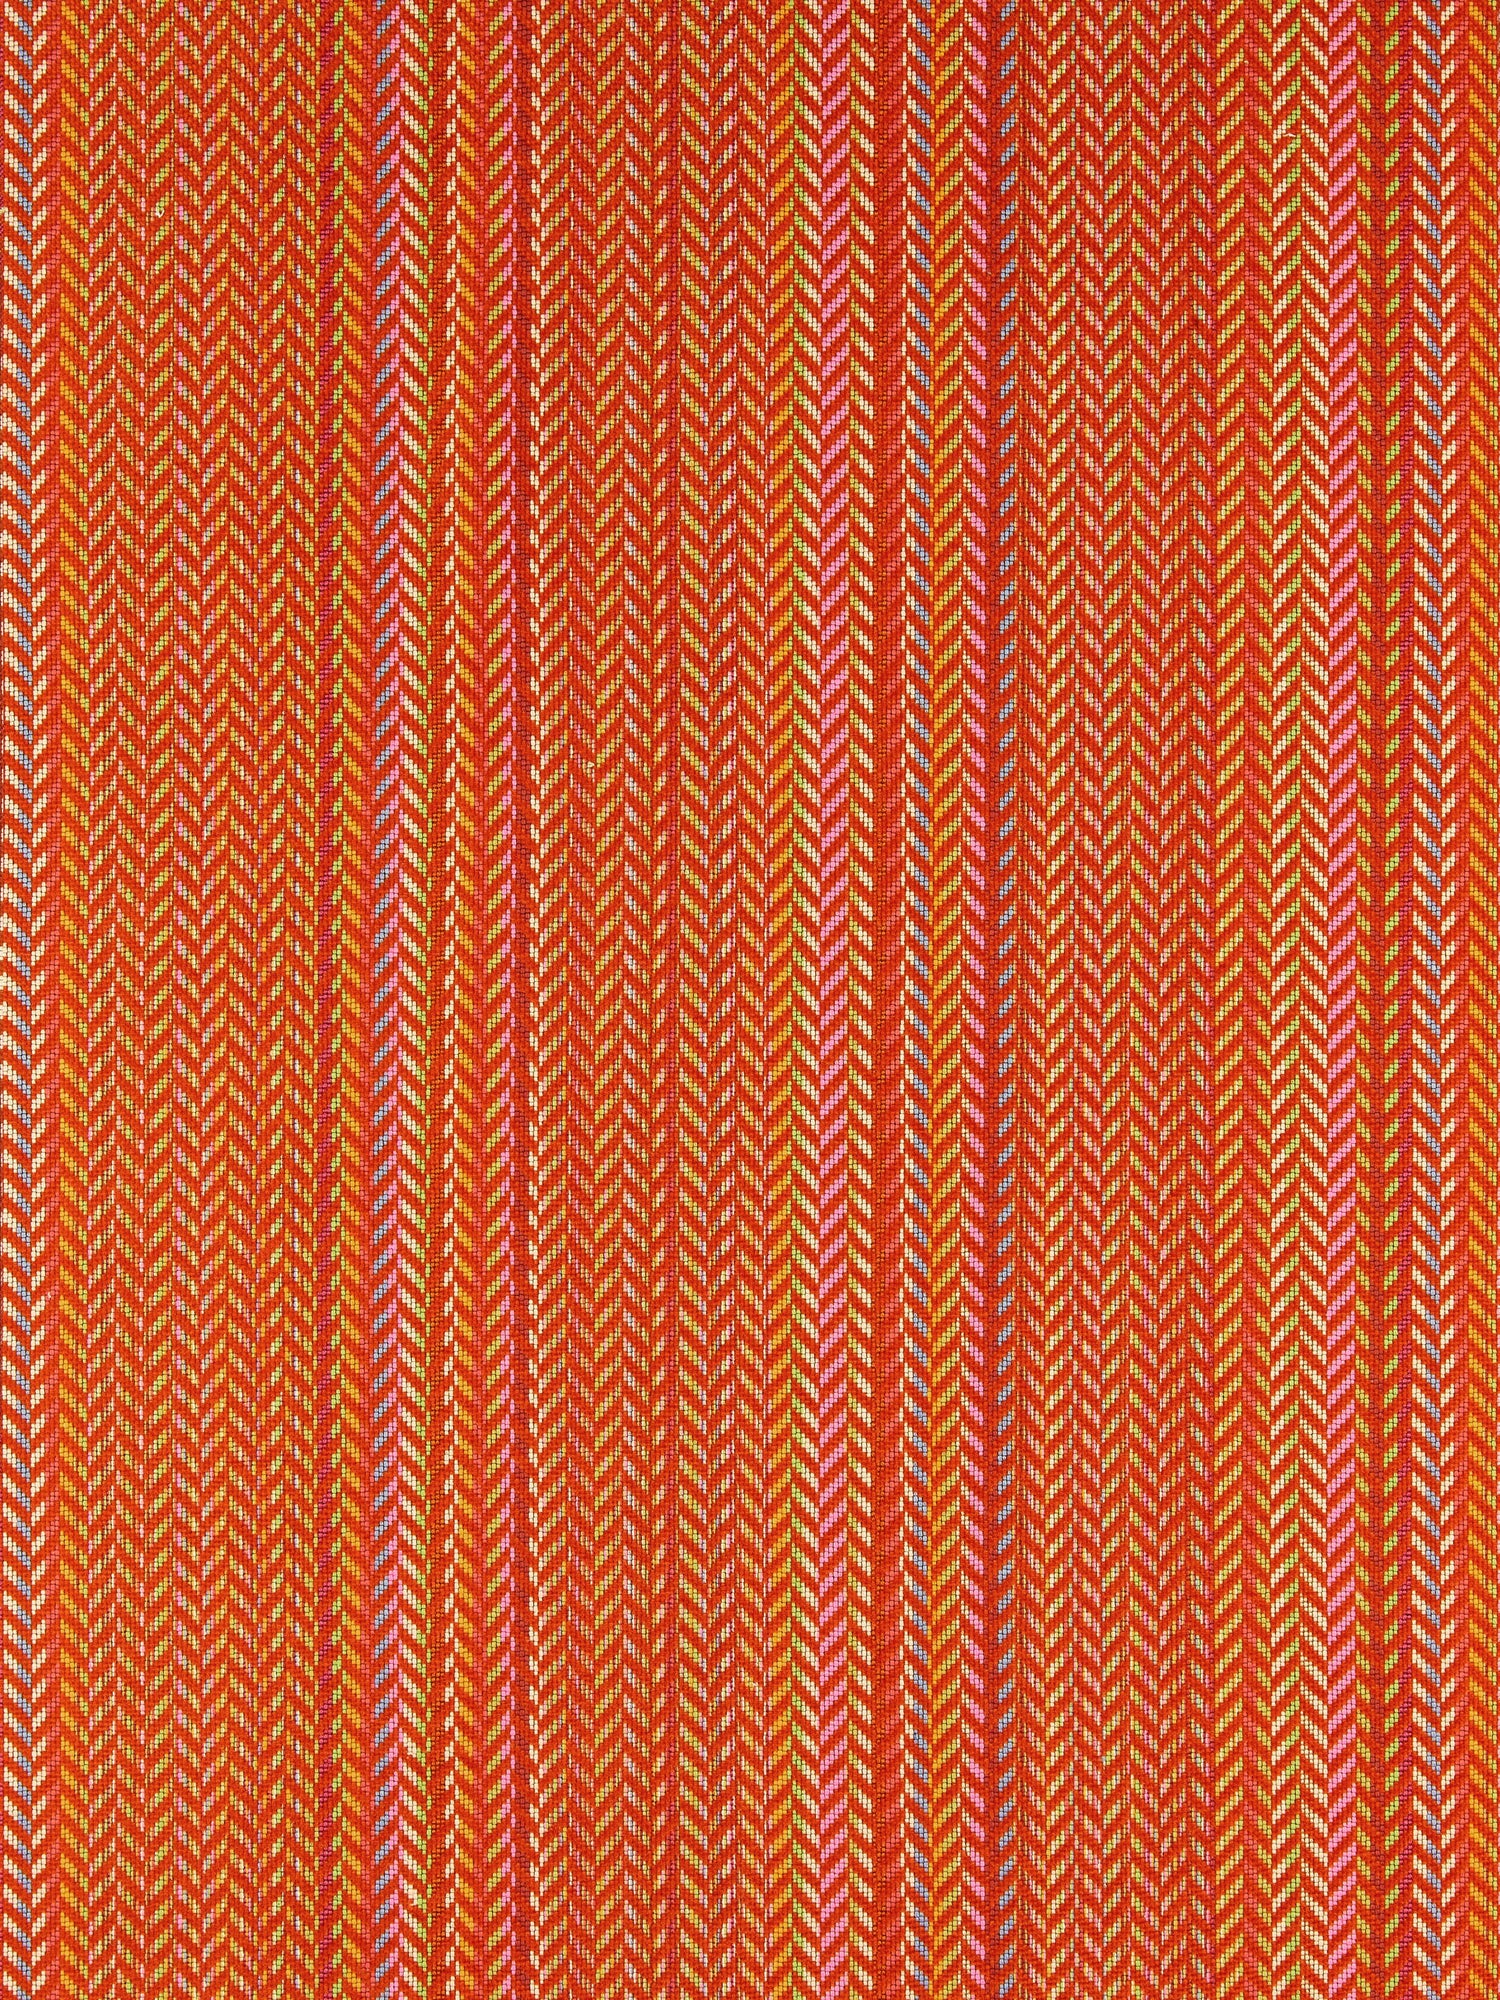 Arrow Stripe fabric in calypso color - pattern number SC 000327254 - by Scalamandre in the Scalamandre Fabrics Book 1 collection